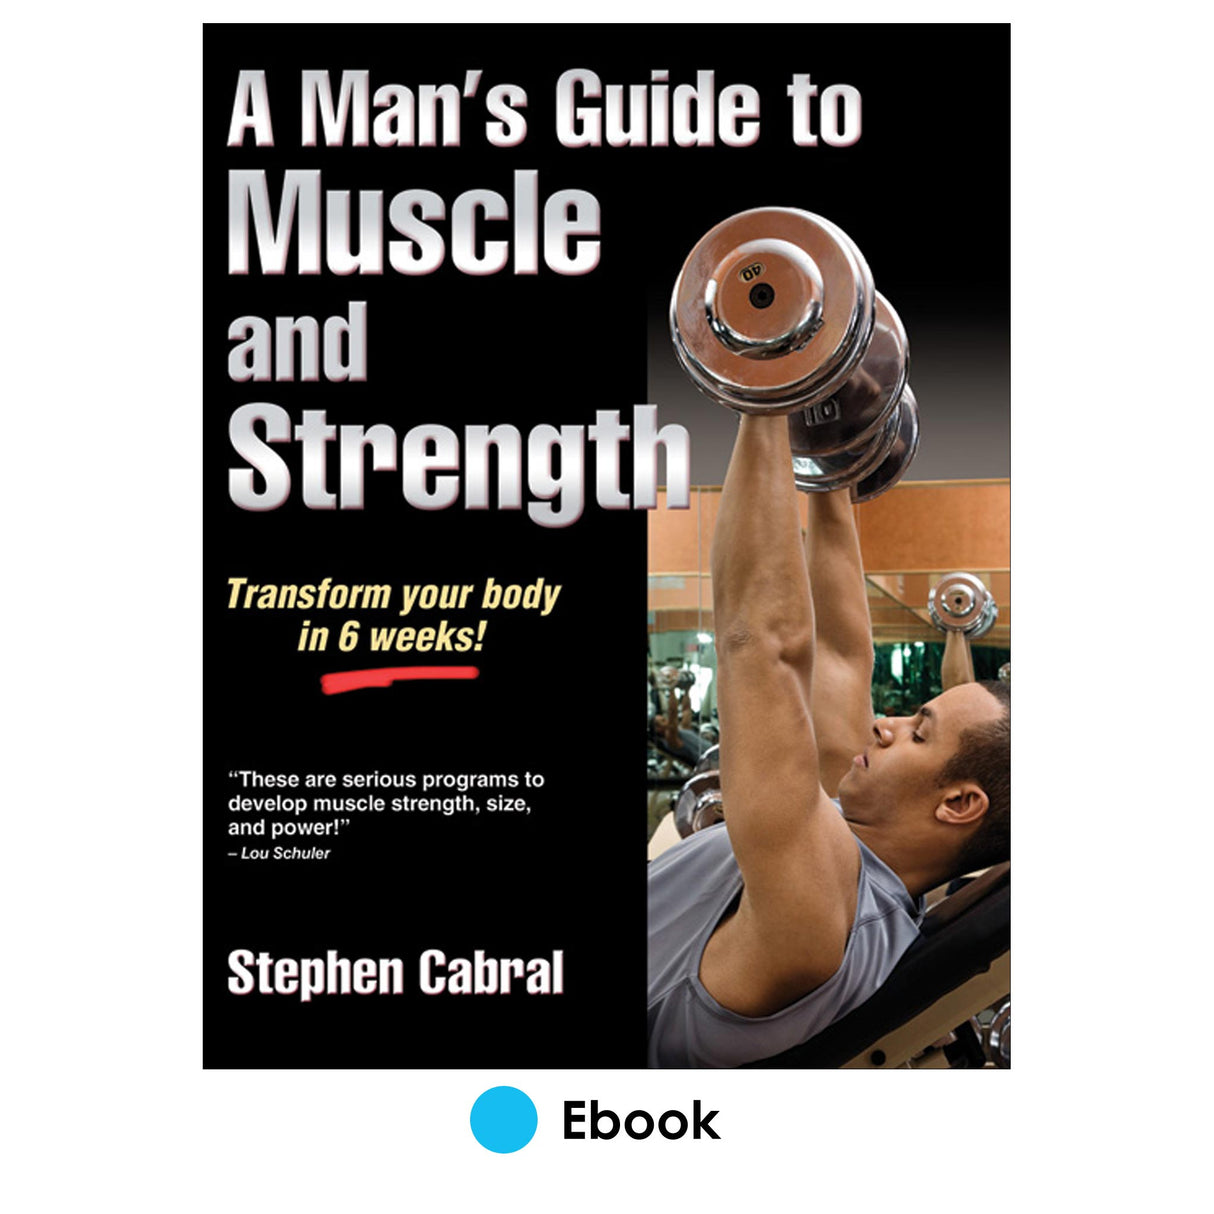 Man's Guide to Muscle and Strength PDF, A